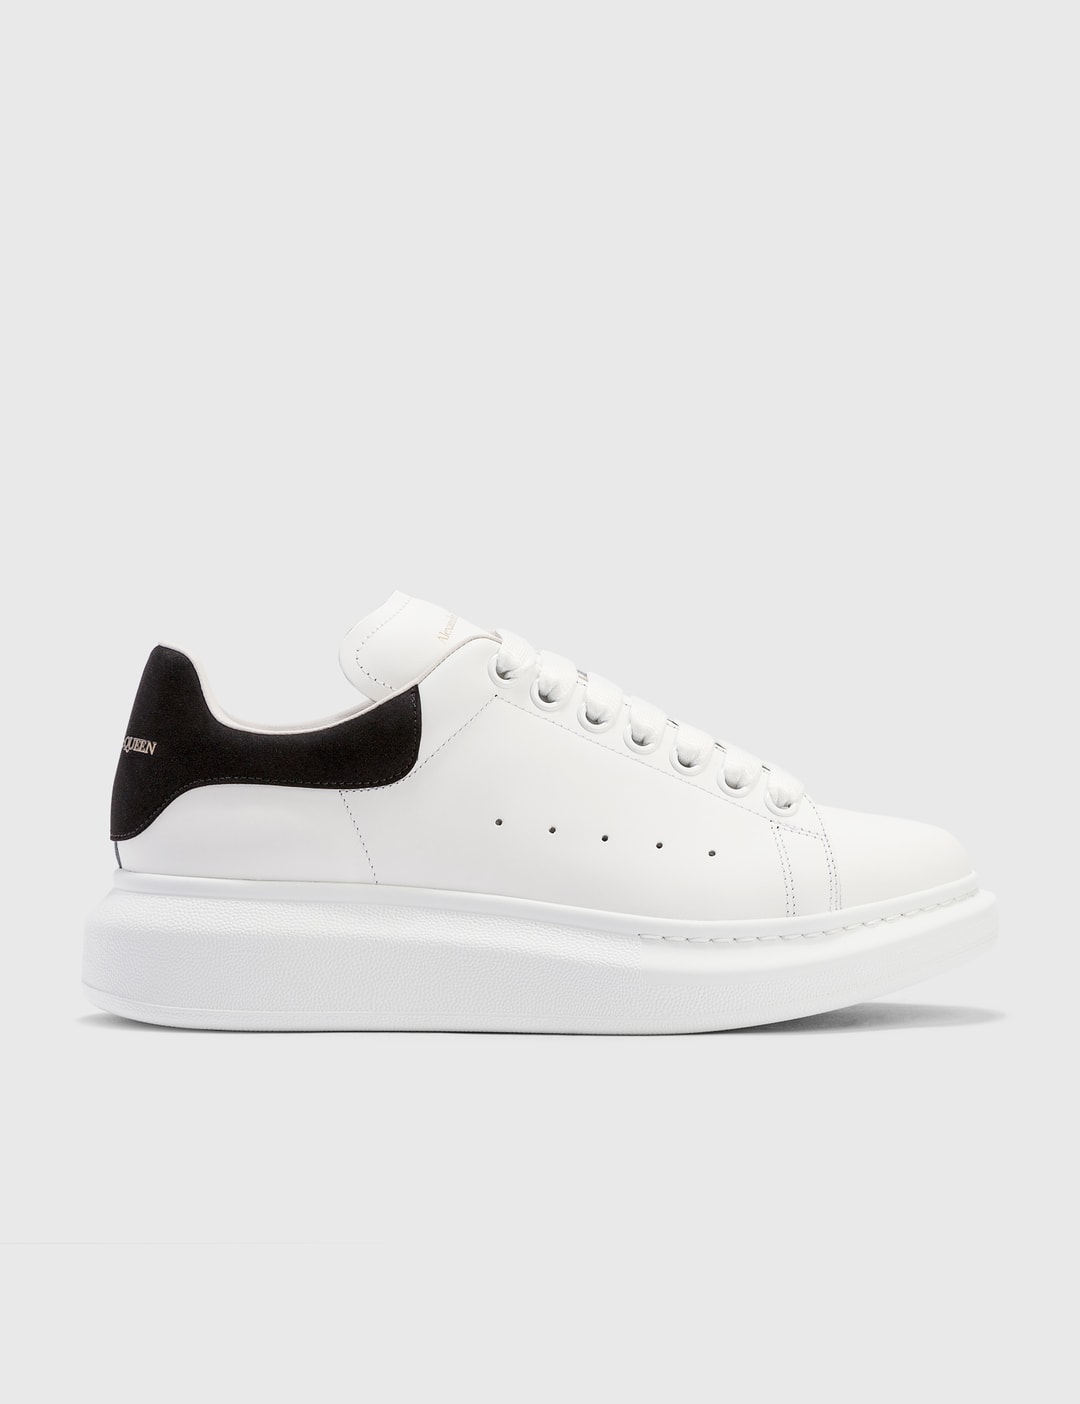 At adskille Skuespiller jeg lytter til musik Alexander McQueen - Oversized Sneaker | HBX - Globally Curated Fashion and  Lifestyle by Hypebeast